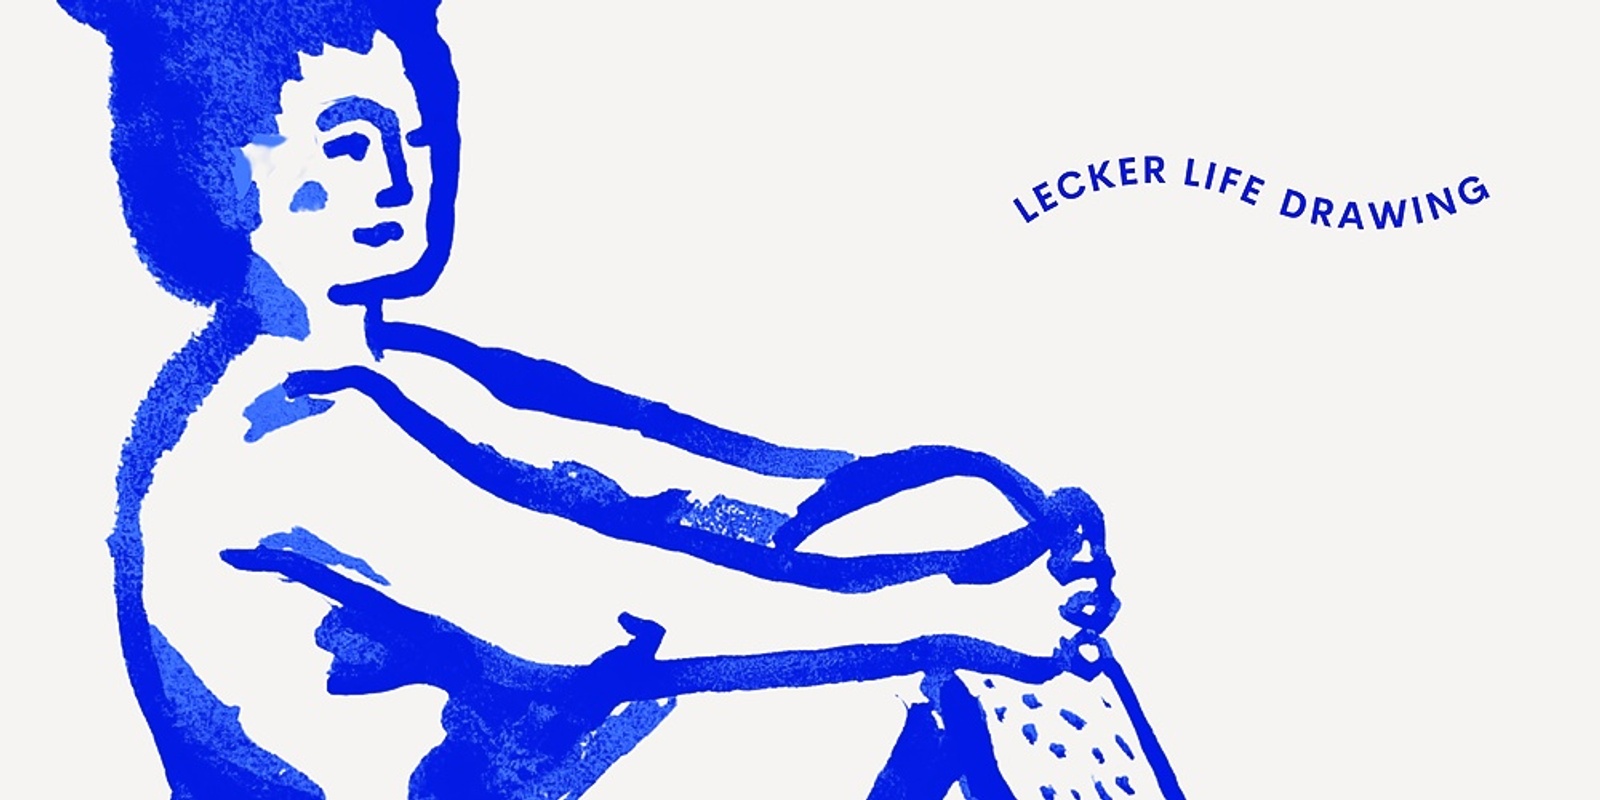 Banner image for Lecker Life Drawing